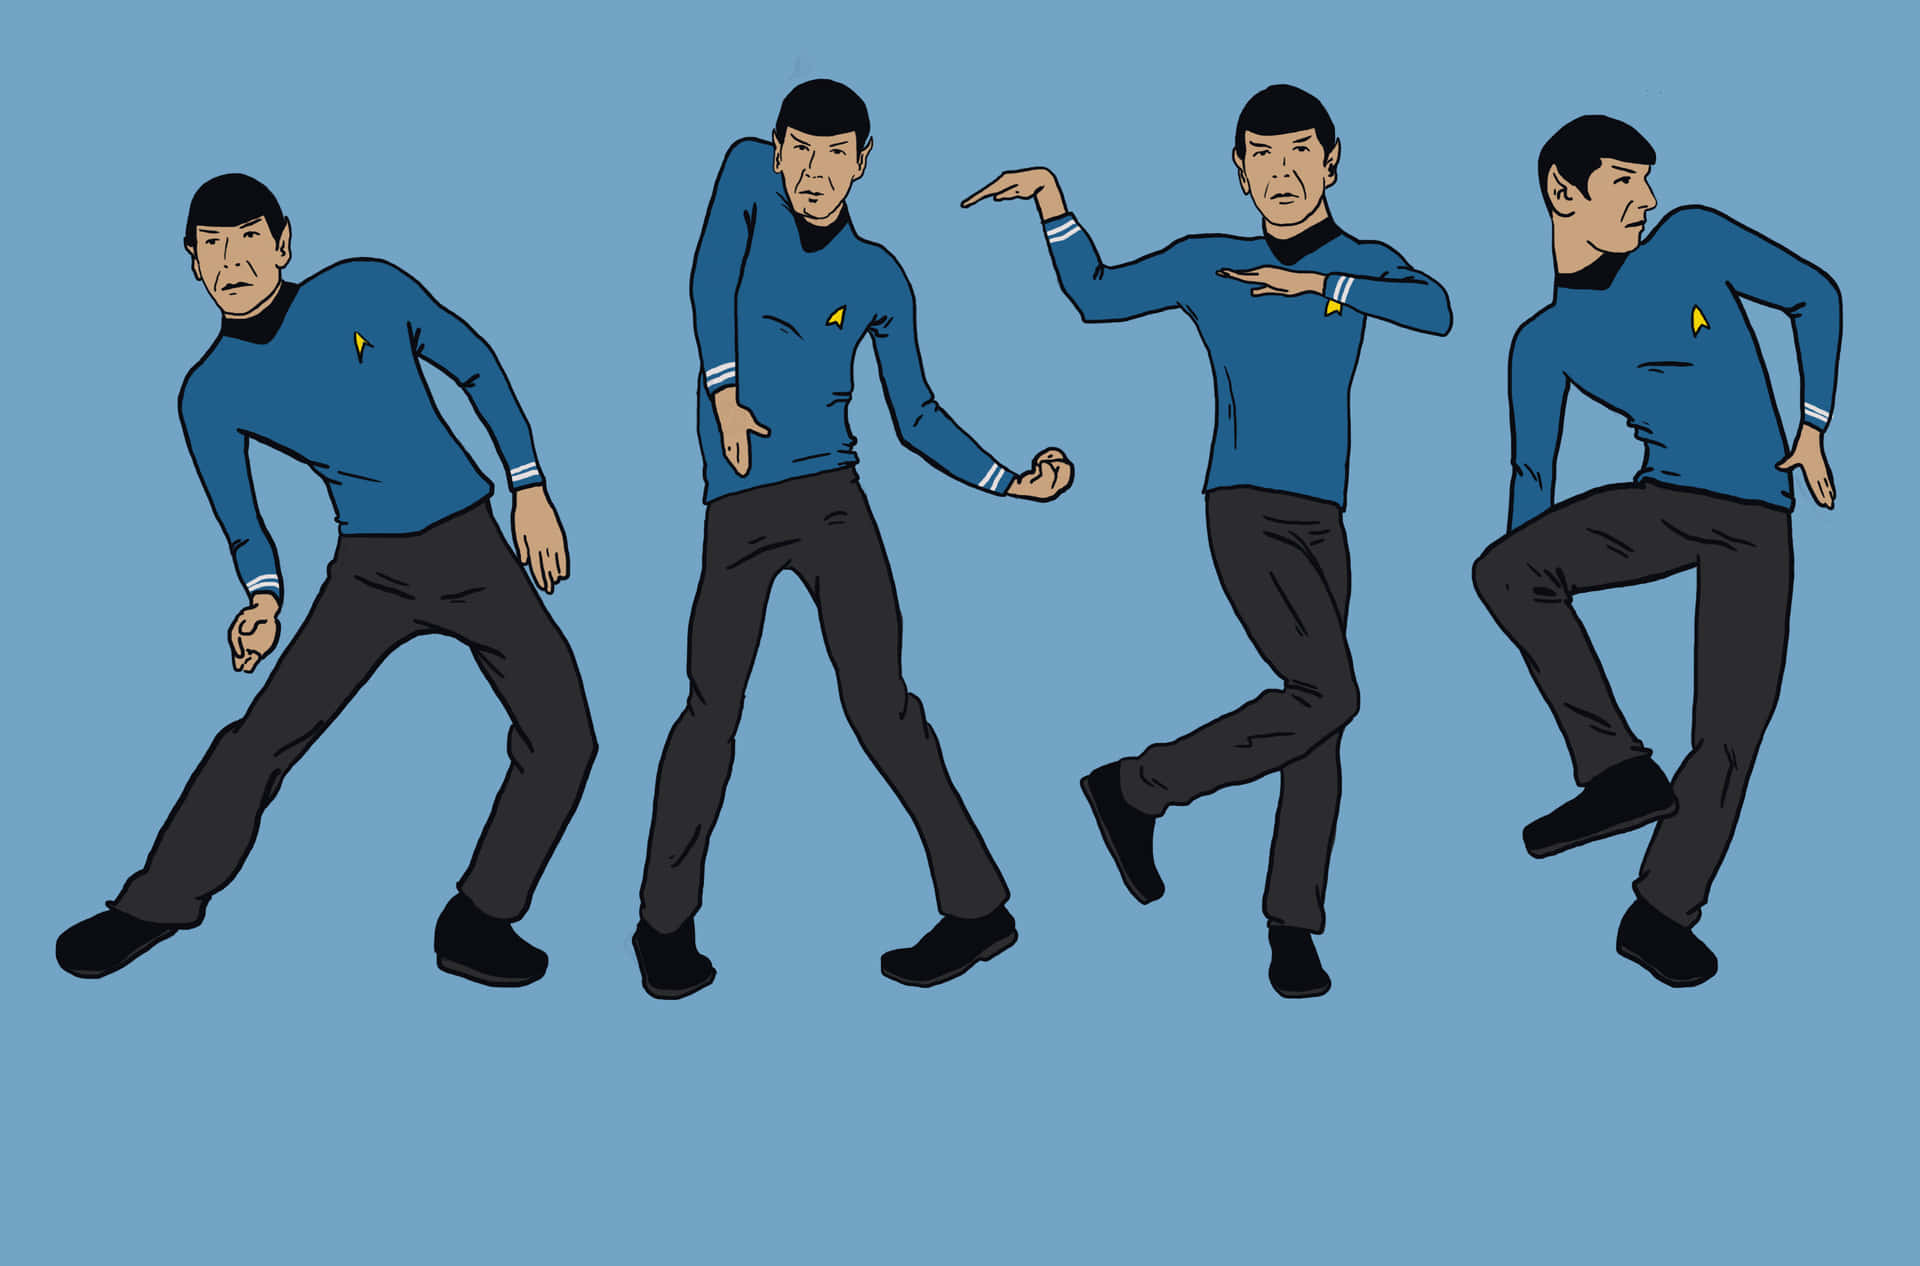 Star Trek - A Man In Different Poses